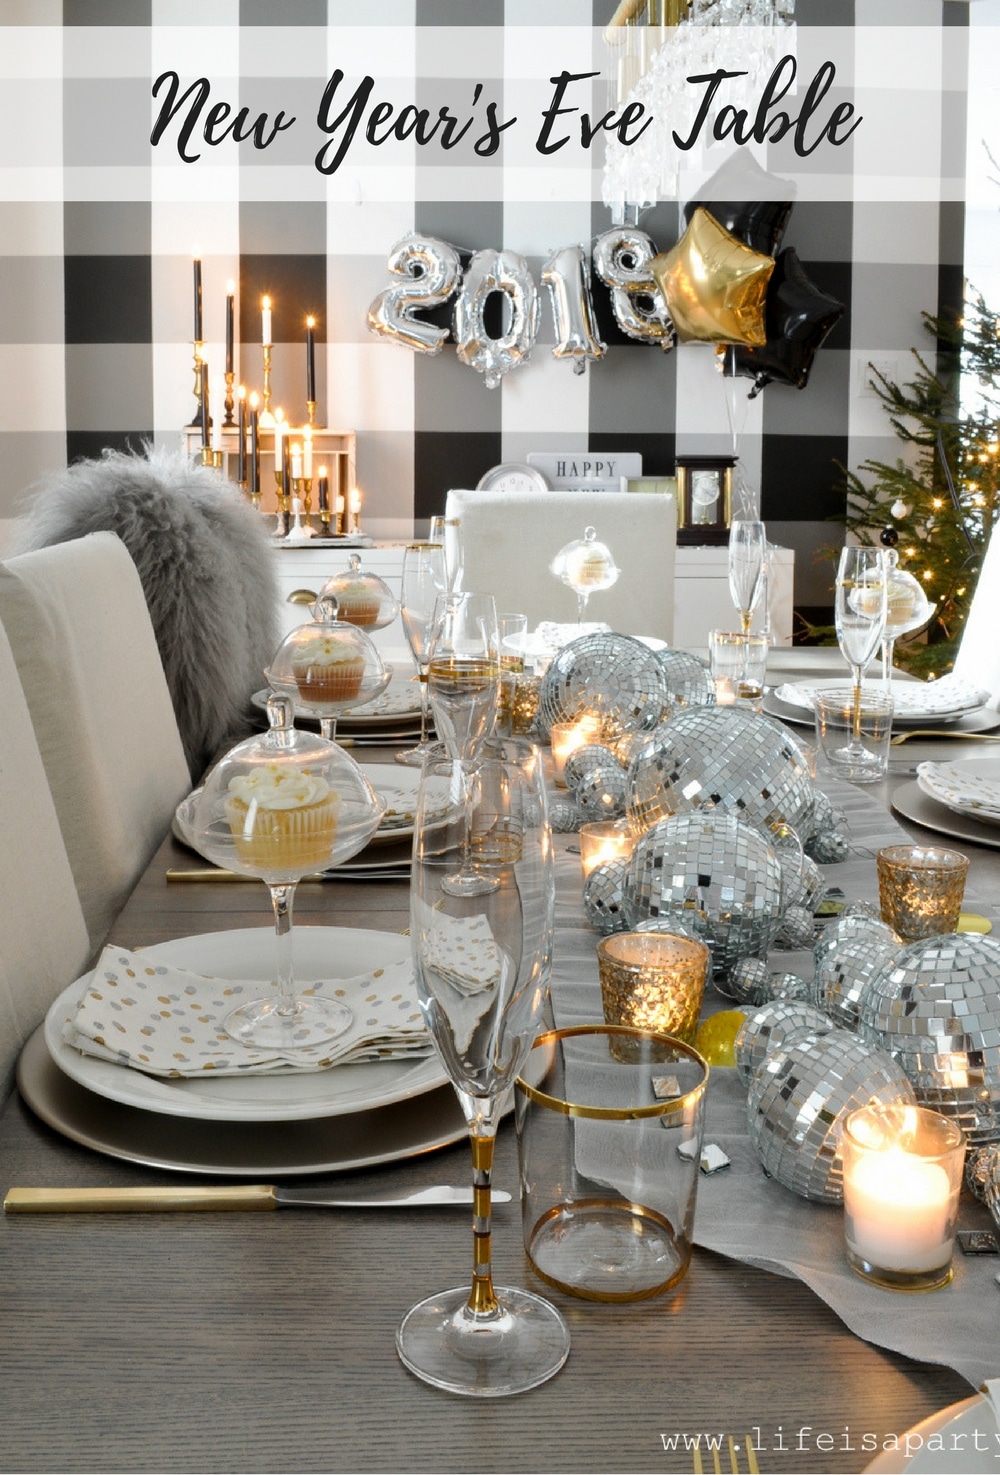 New Year's Eve Table Decorations: Be inspired by a disco ball center piece, candles, and a collection of clocks. This elegant table is full of wow factor!